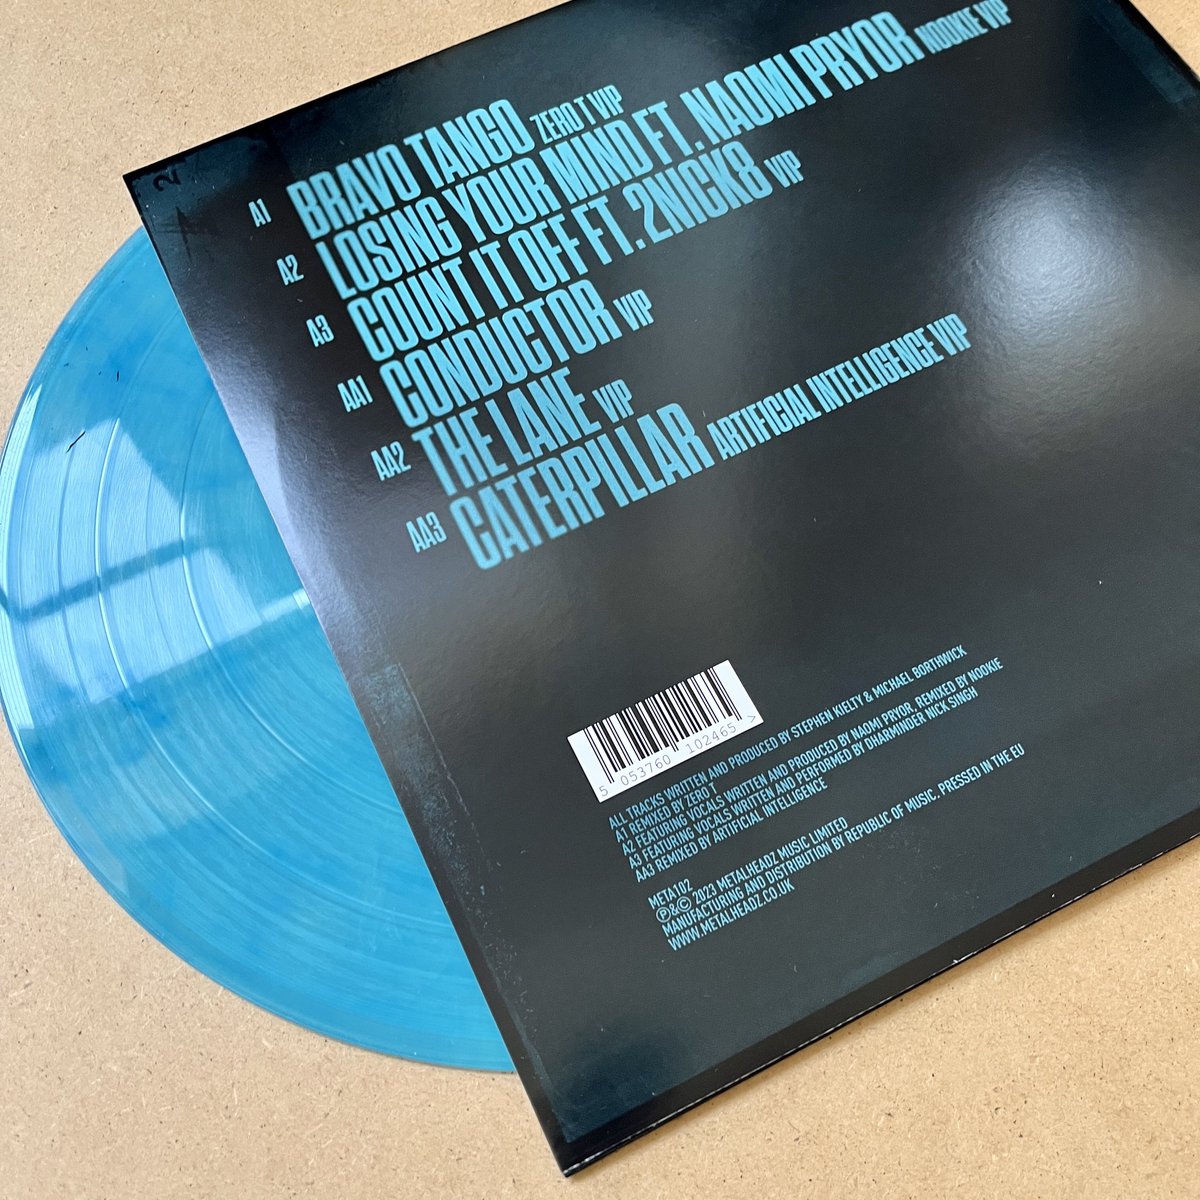 It's full release day for @scardnb's 'The Road Less Travelled VIP' 📢 Featuring VIPs from @zerotdnb, @djnookie and @glennAI as well as 3 VIPs from @scardnb themselves, this is a bumper release full to the brim 🥁 Also available on blue vinyl - bfan.link/trltvip